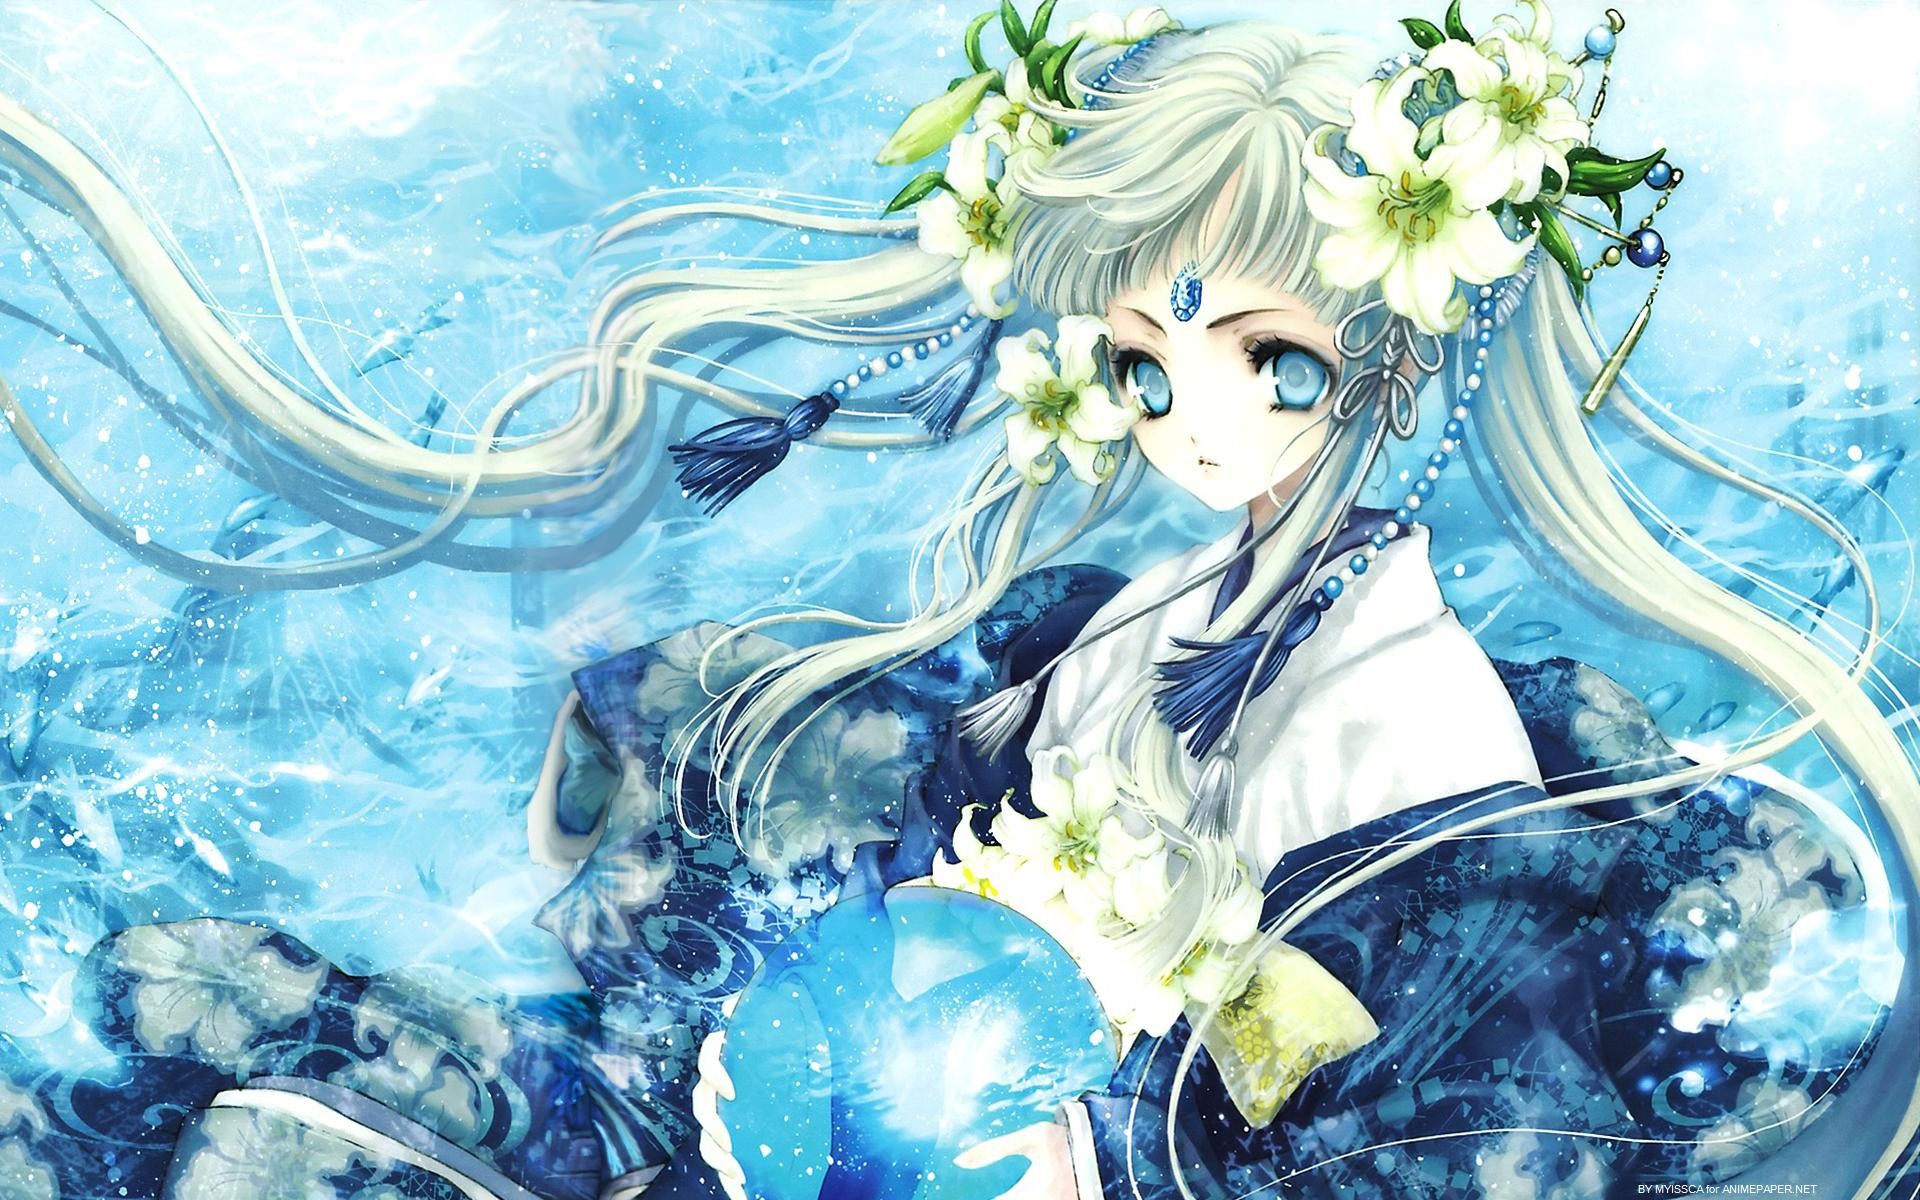 Water blue flowers blue eyes long hair fantasy art goddess twintails jewelry white hair japanese clothes anime girls wallpaperx1200